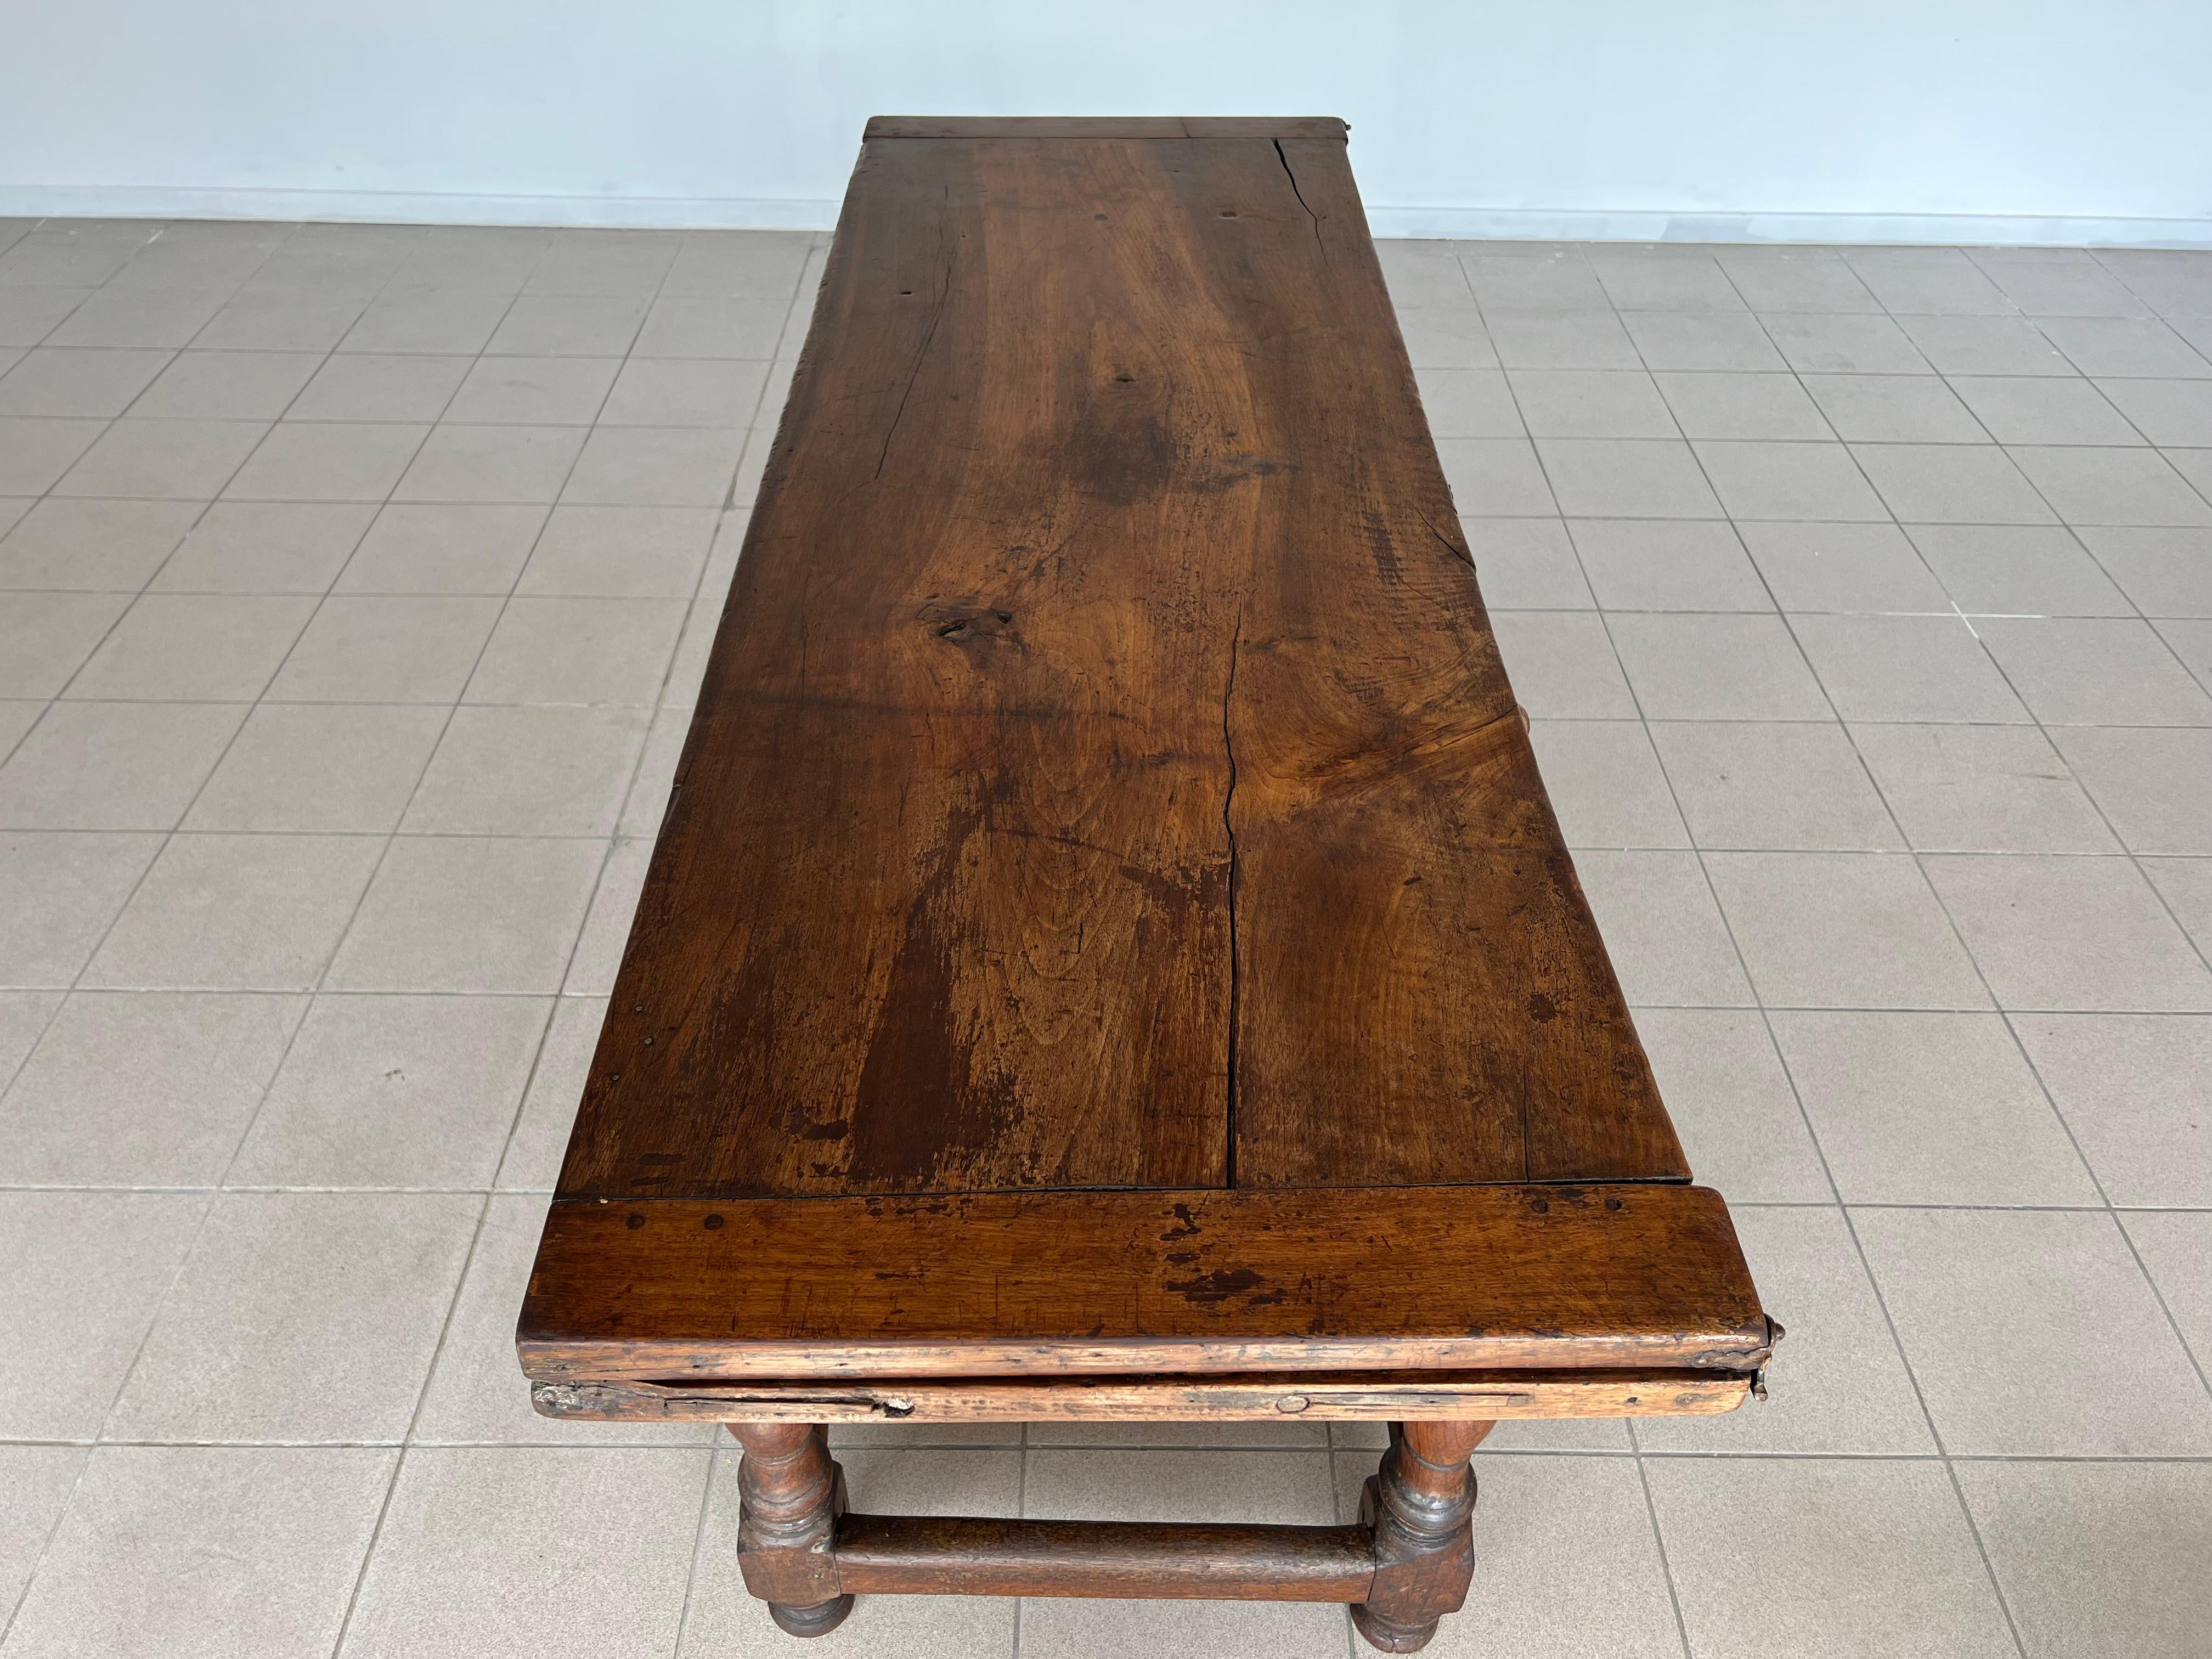 Rare 18c Swiss French Alp Rustic Flip Top Dining Table or Desk With Two Drawers For Sale 5